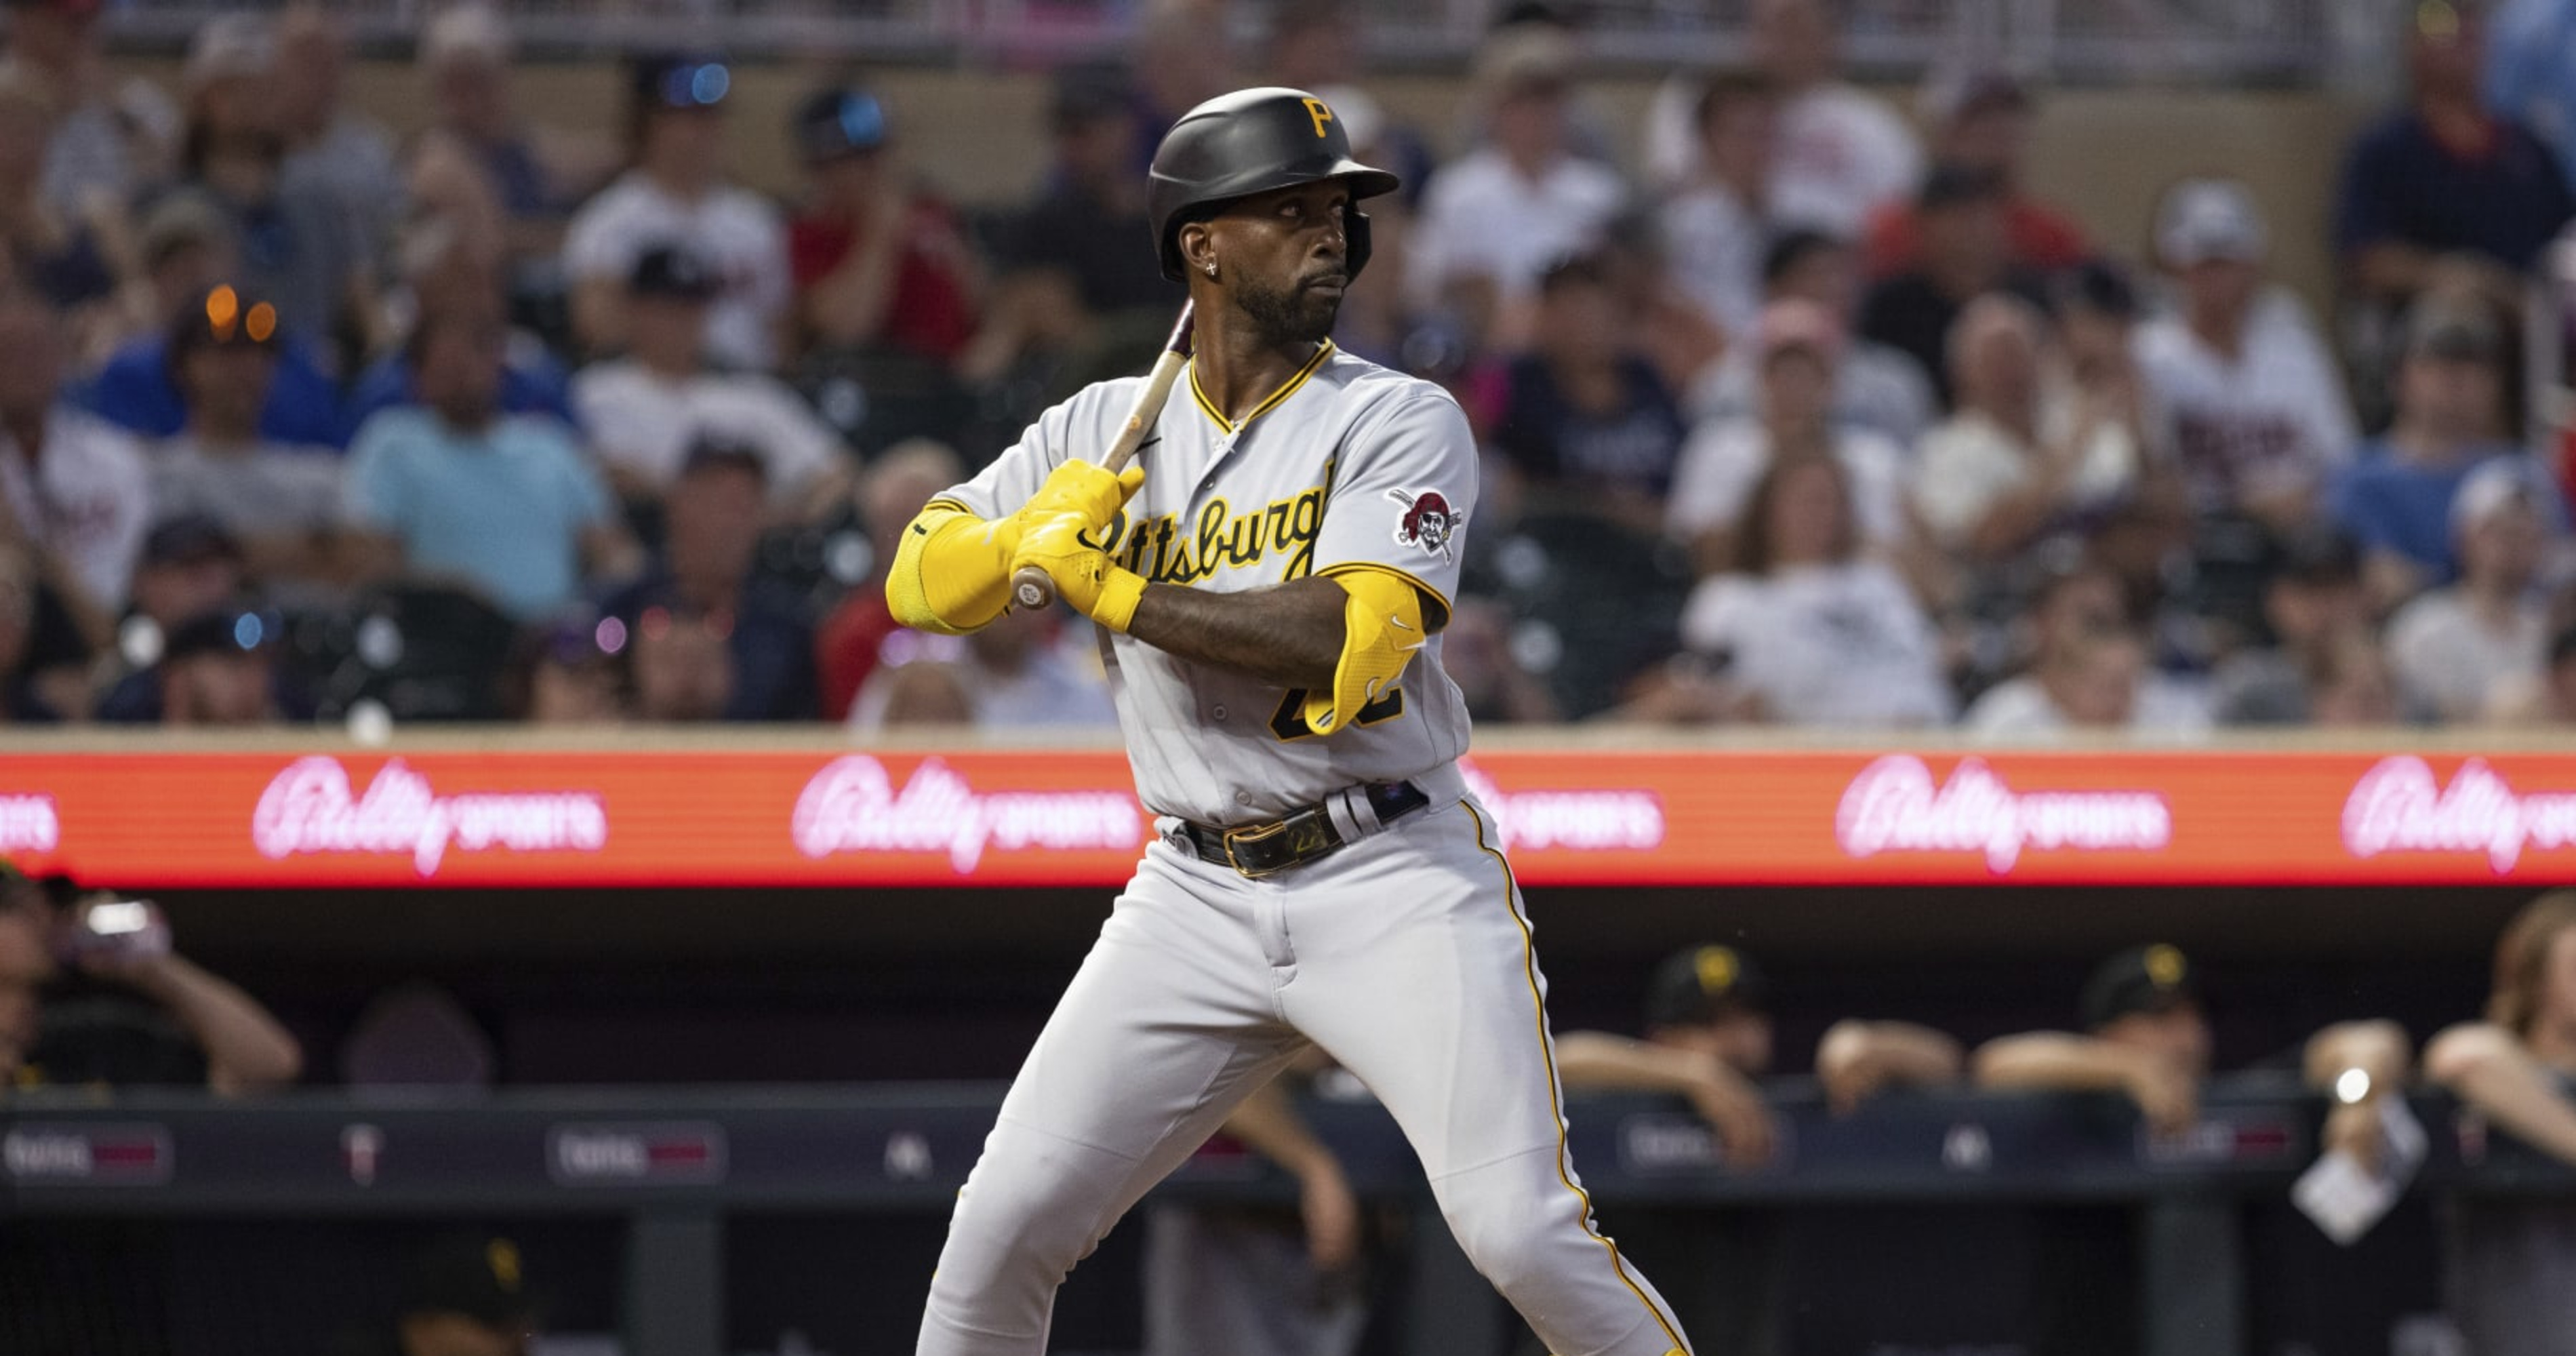 MLB Rumors: Andrew McCutchen, Pirates Agree to New 1-Year, $5M Contract ...